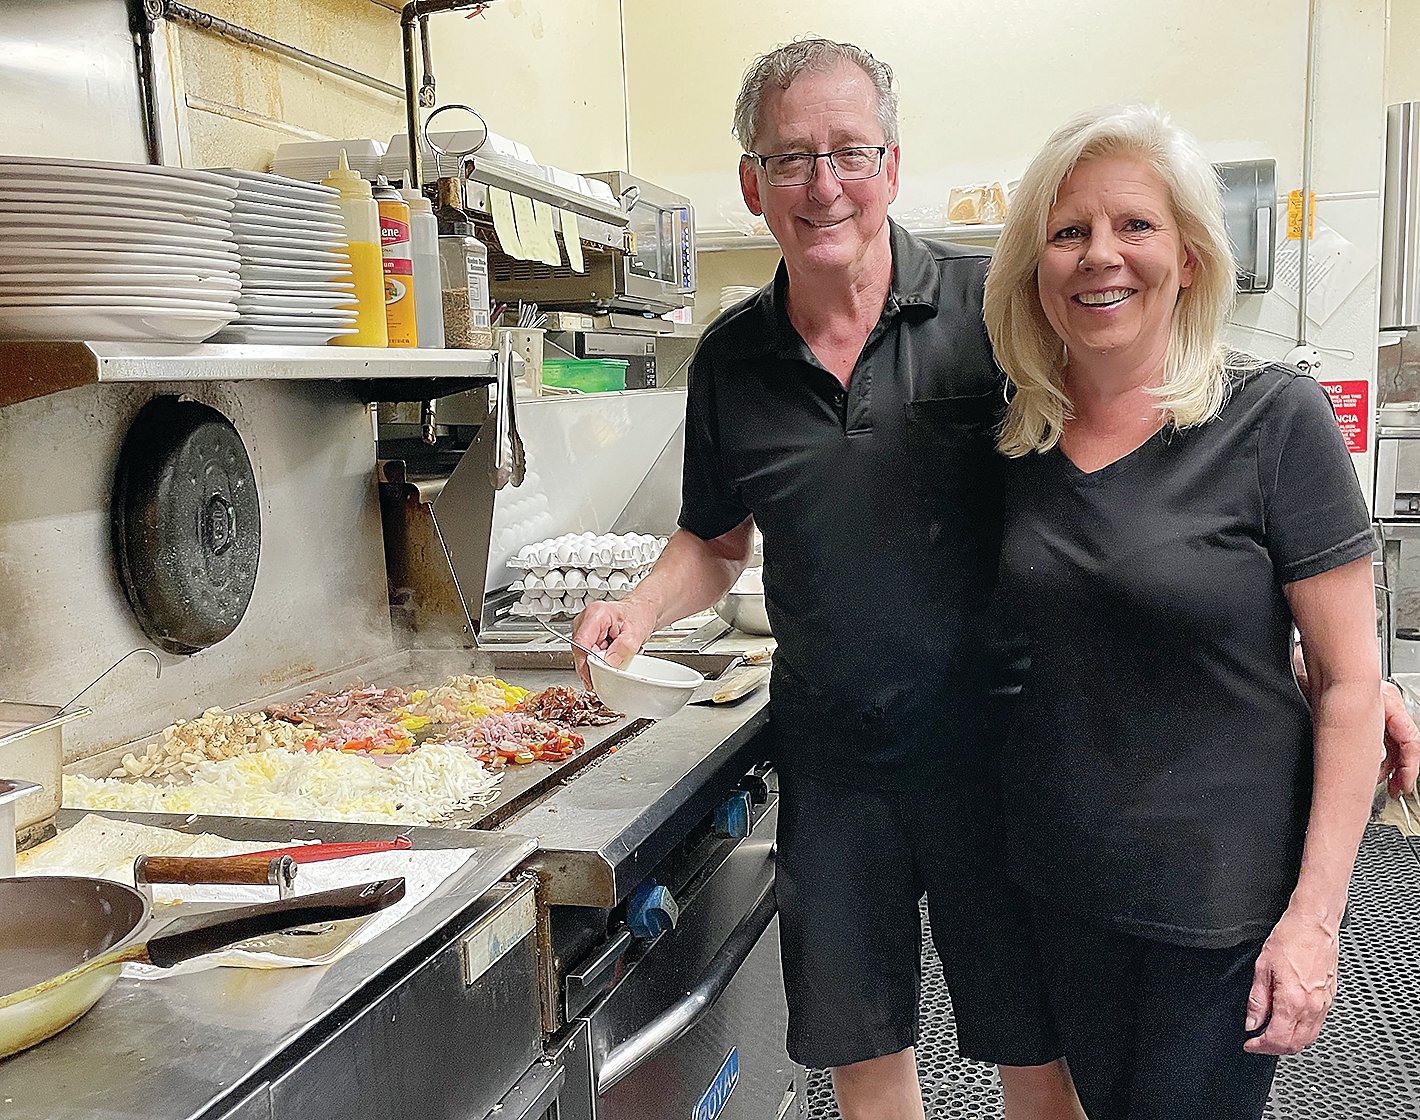 Randy and Carol Semo were on hand for last week’s customer appreciation day at Good Ol’ Days. The couple has owned the popular bar and restaurant in Tower for 20 years, with Randy 
handling much of the day-to-day operations. Ownership was to formally change hands to Dan and Greta 
Burandt, on July 1.